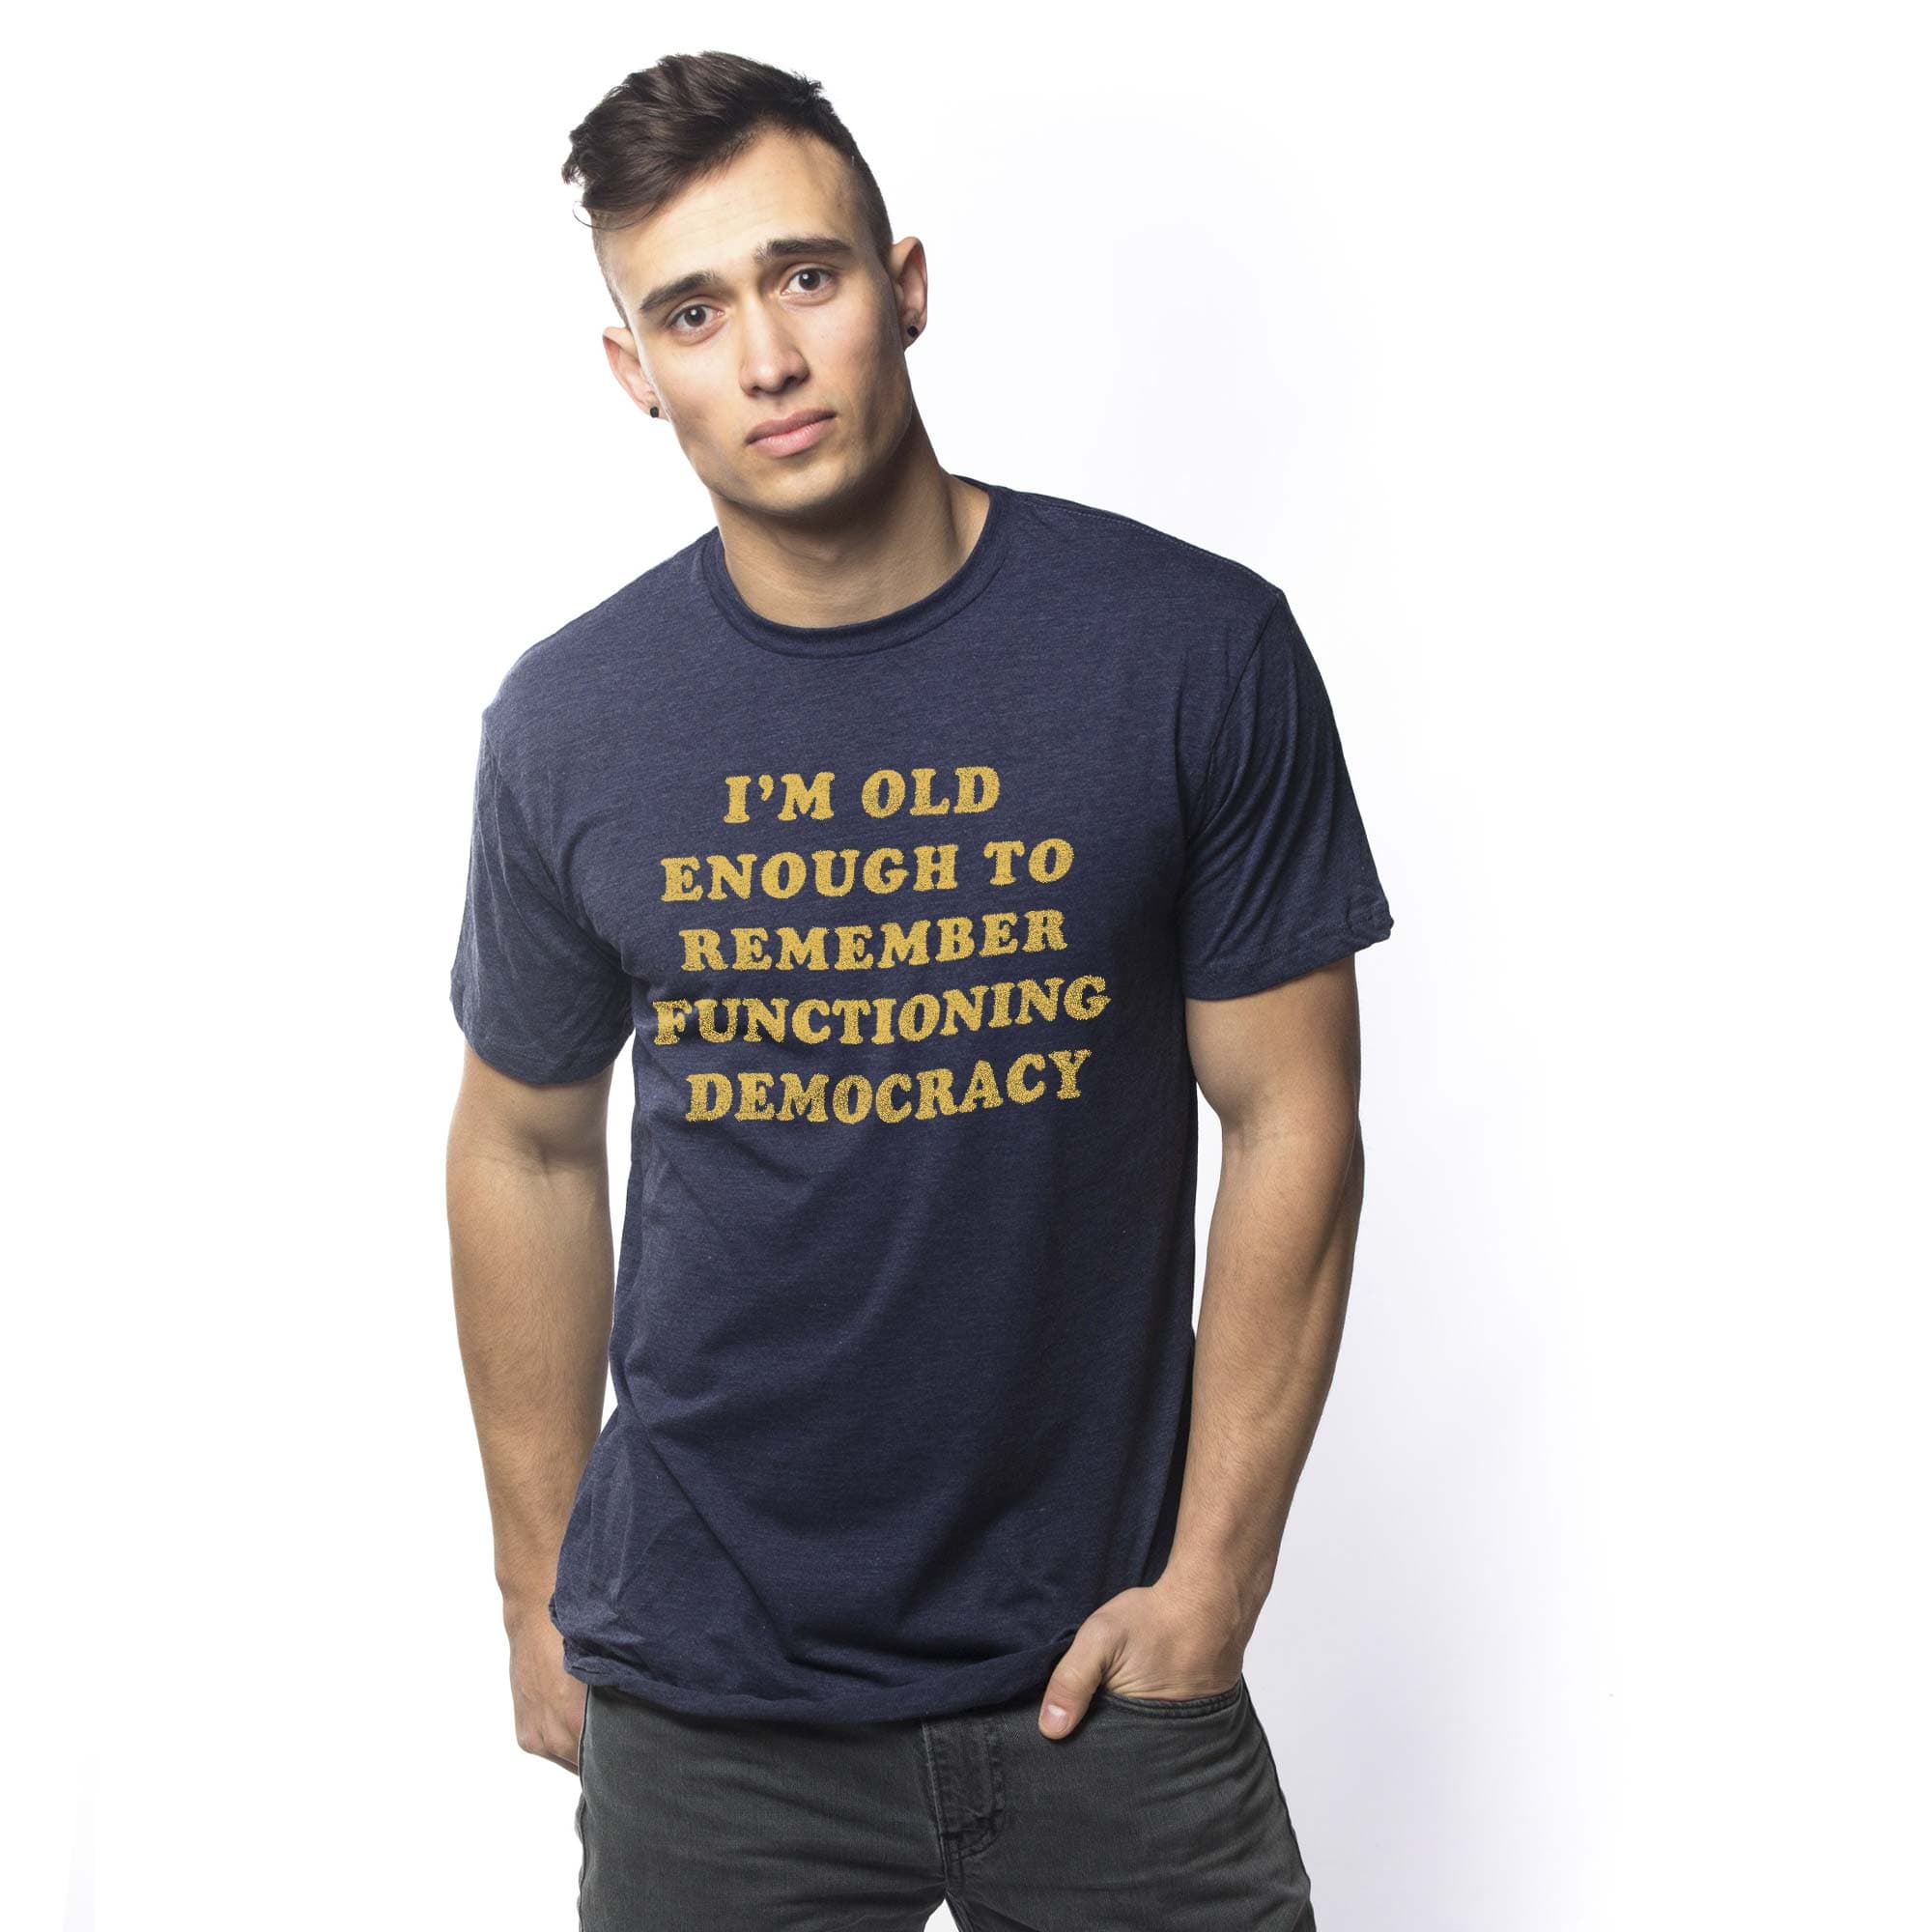 Men's I'M Old Enough To Remember Functioning Democracy Funny Graphic T-Shirt | Cool Politics Trump  Tee | Solid Threads